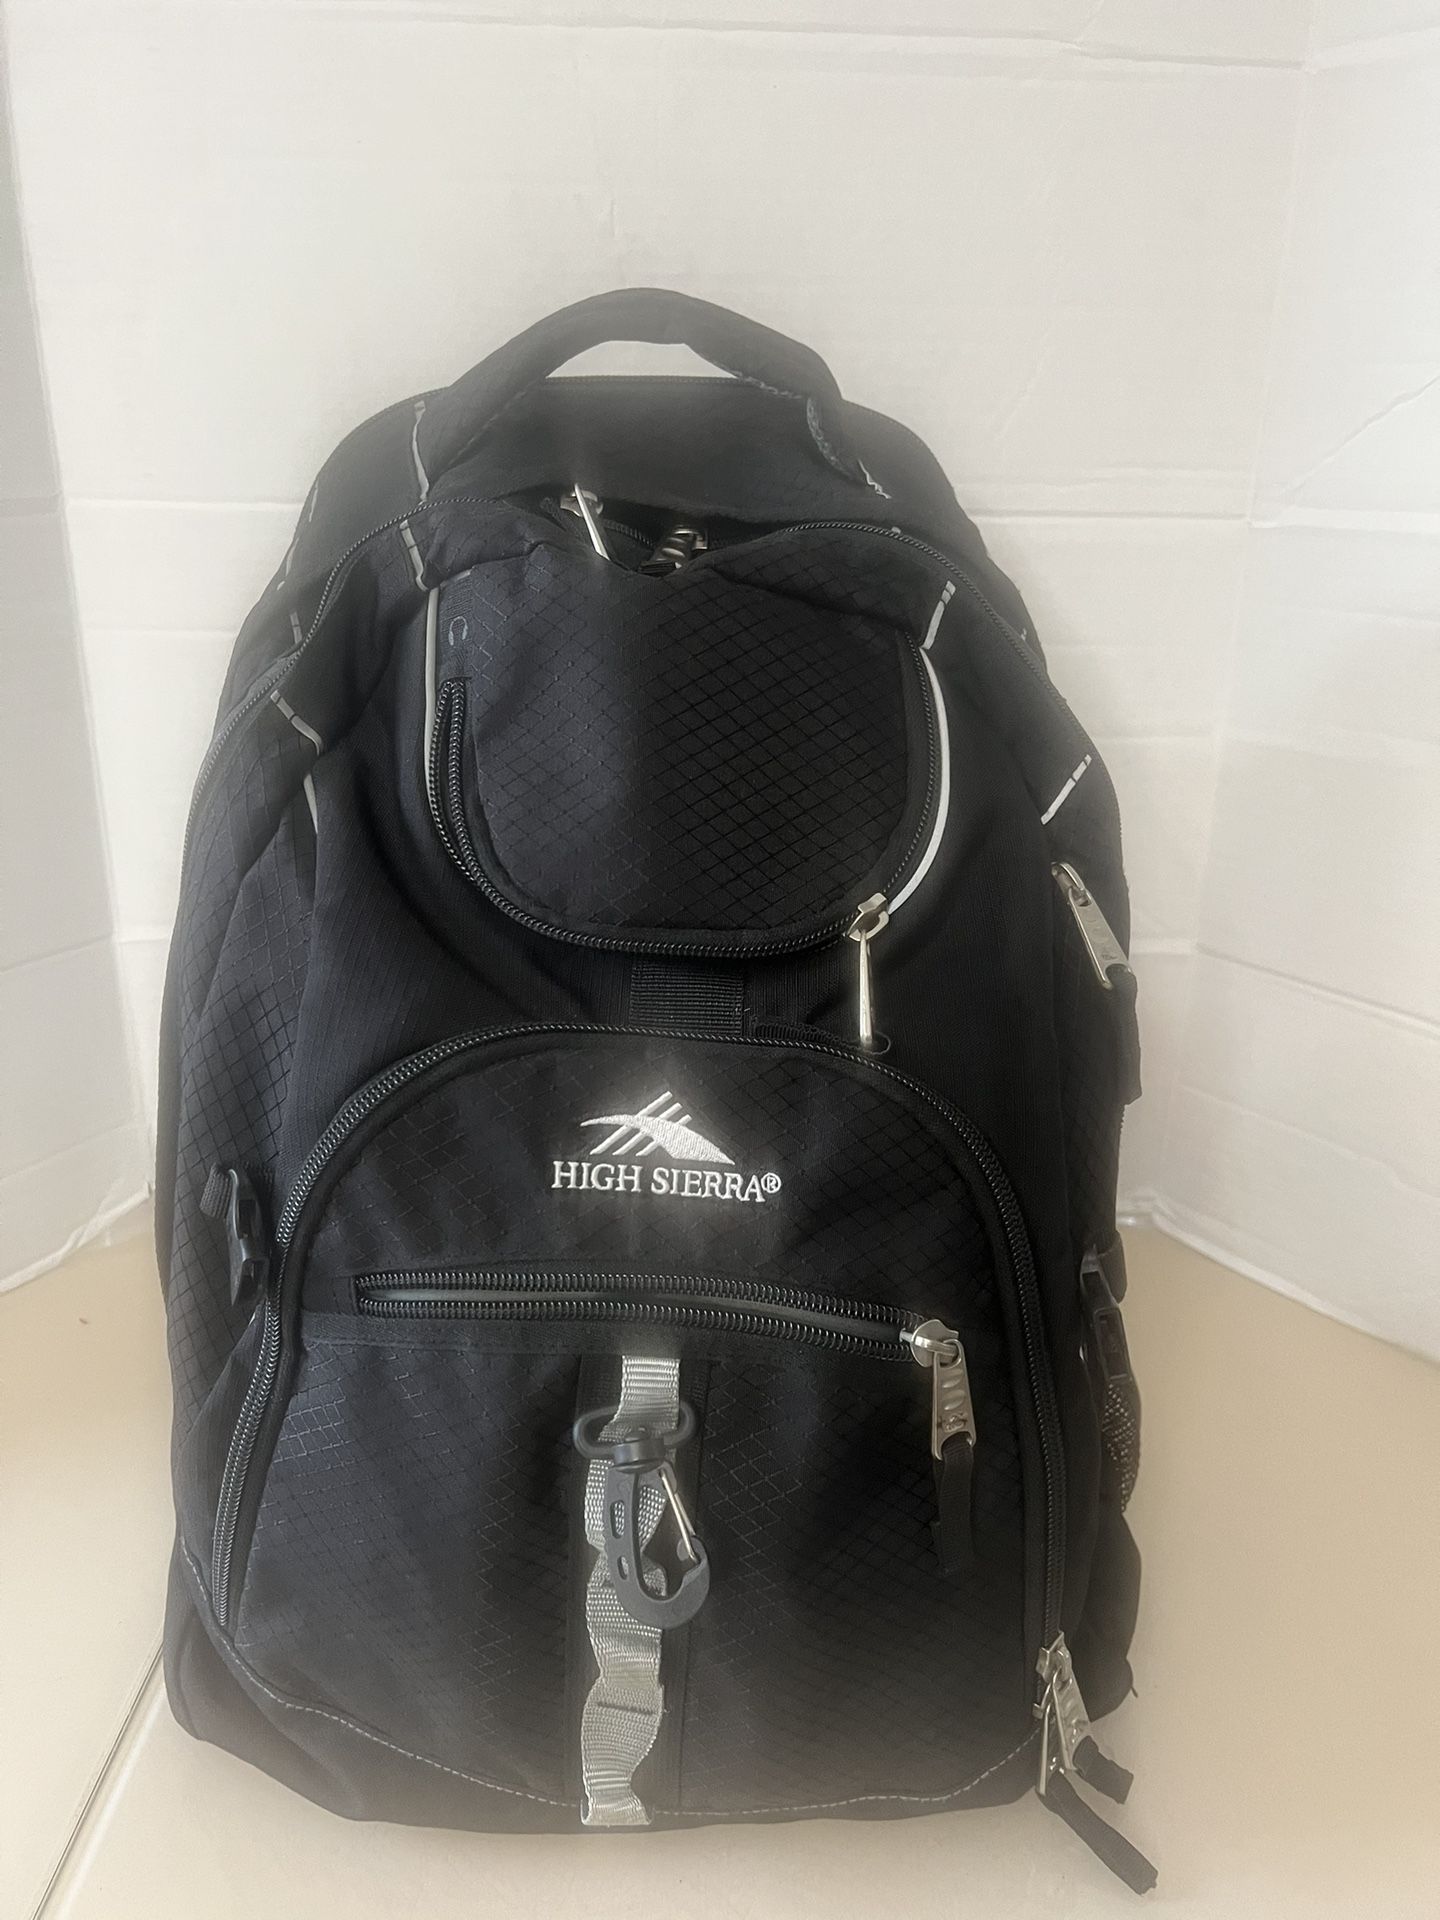 High Sierra Backpack Padded Gray Black Suspension Strap System Hiking Camping. Used in good condition with minor cosmetic blemishes associated with no